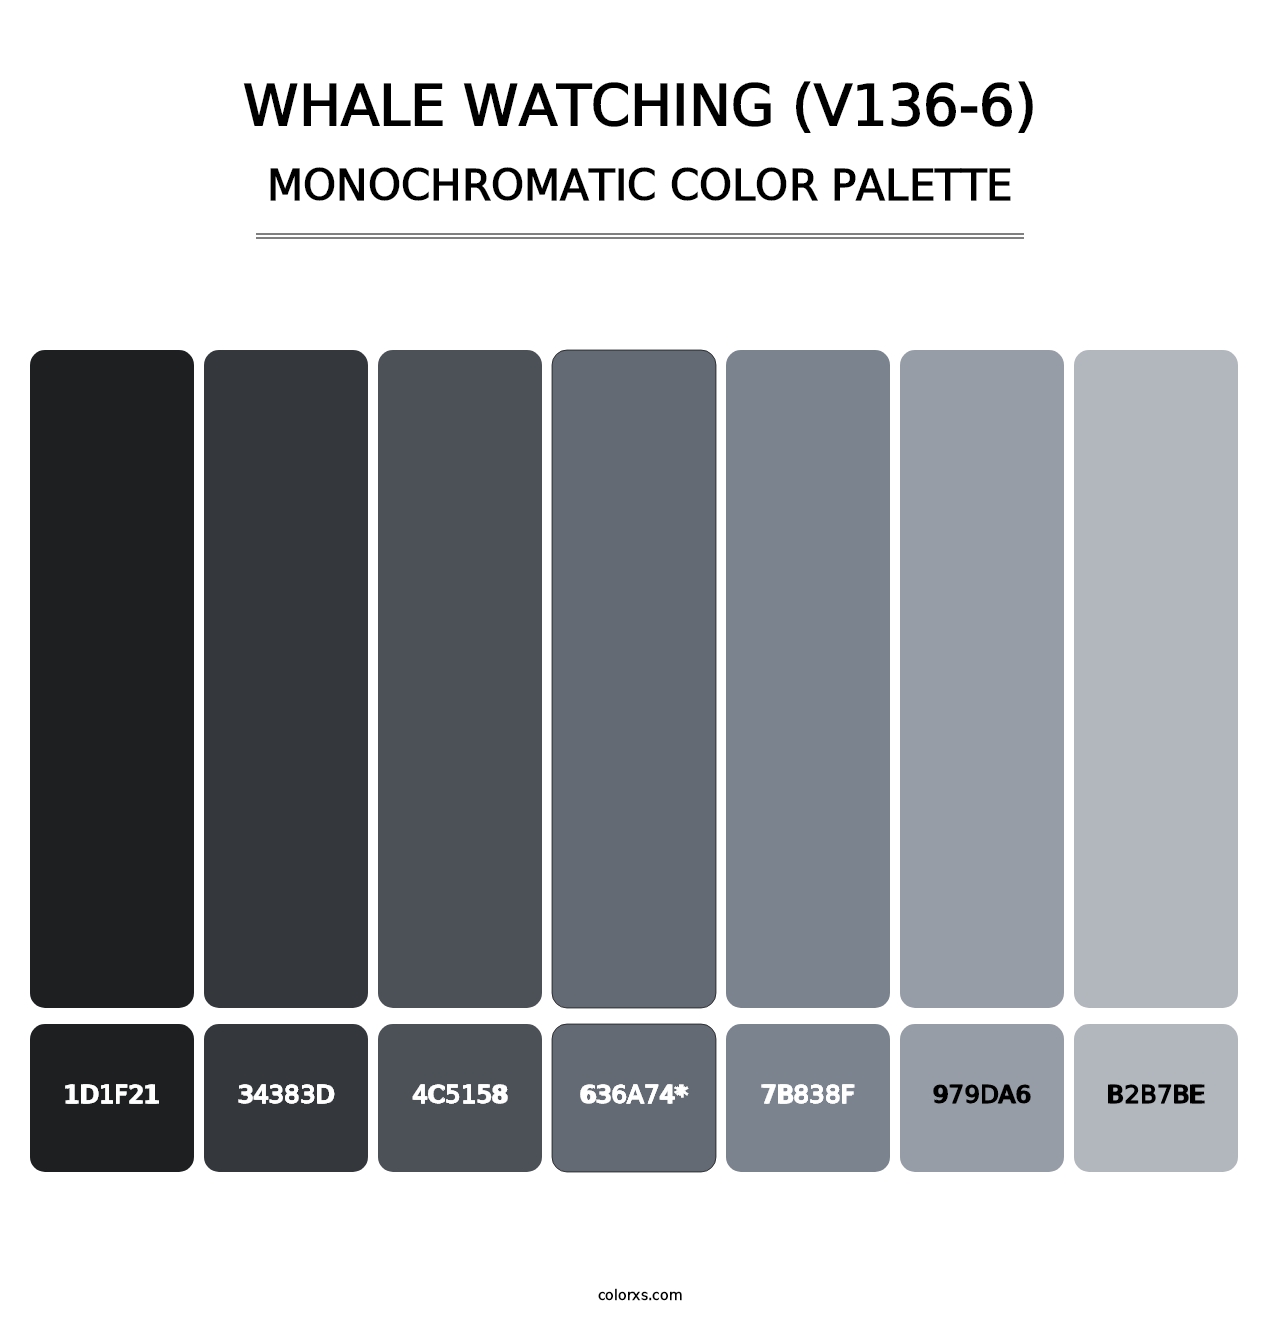 Whale Watching (V136-6) - Monochromatic Color Palette